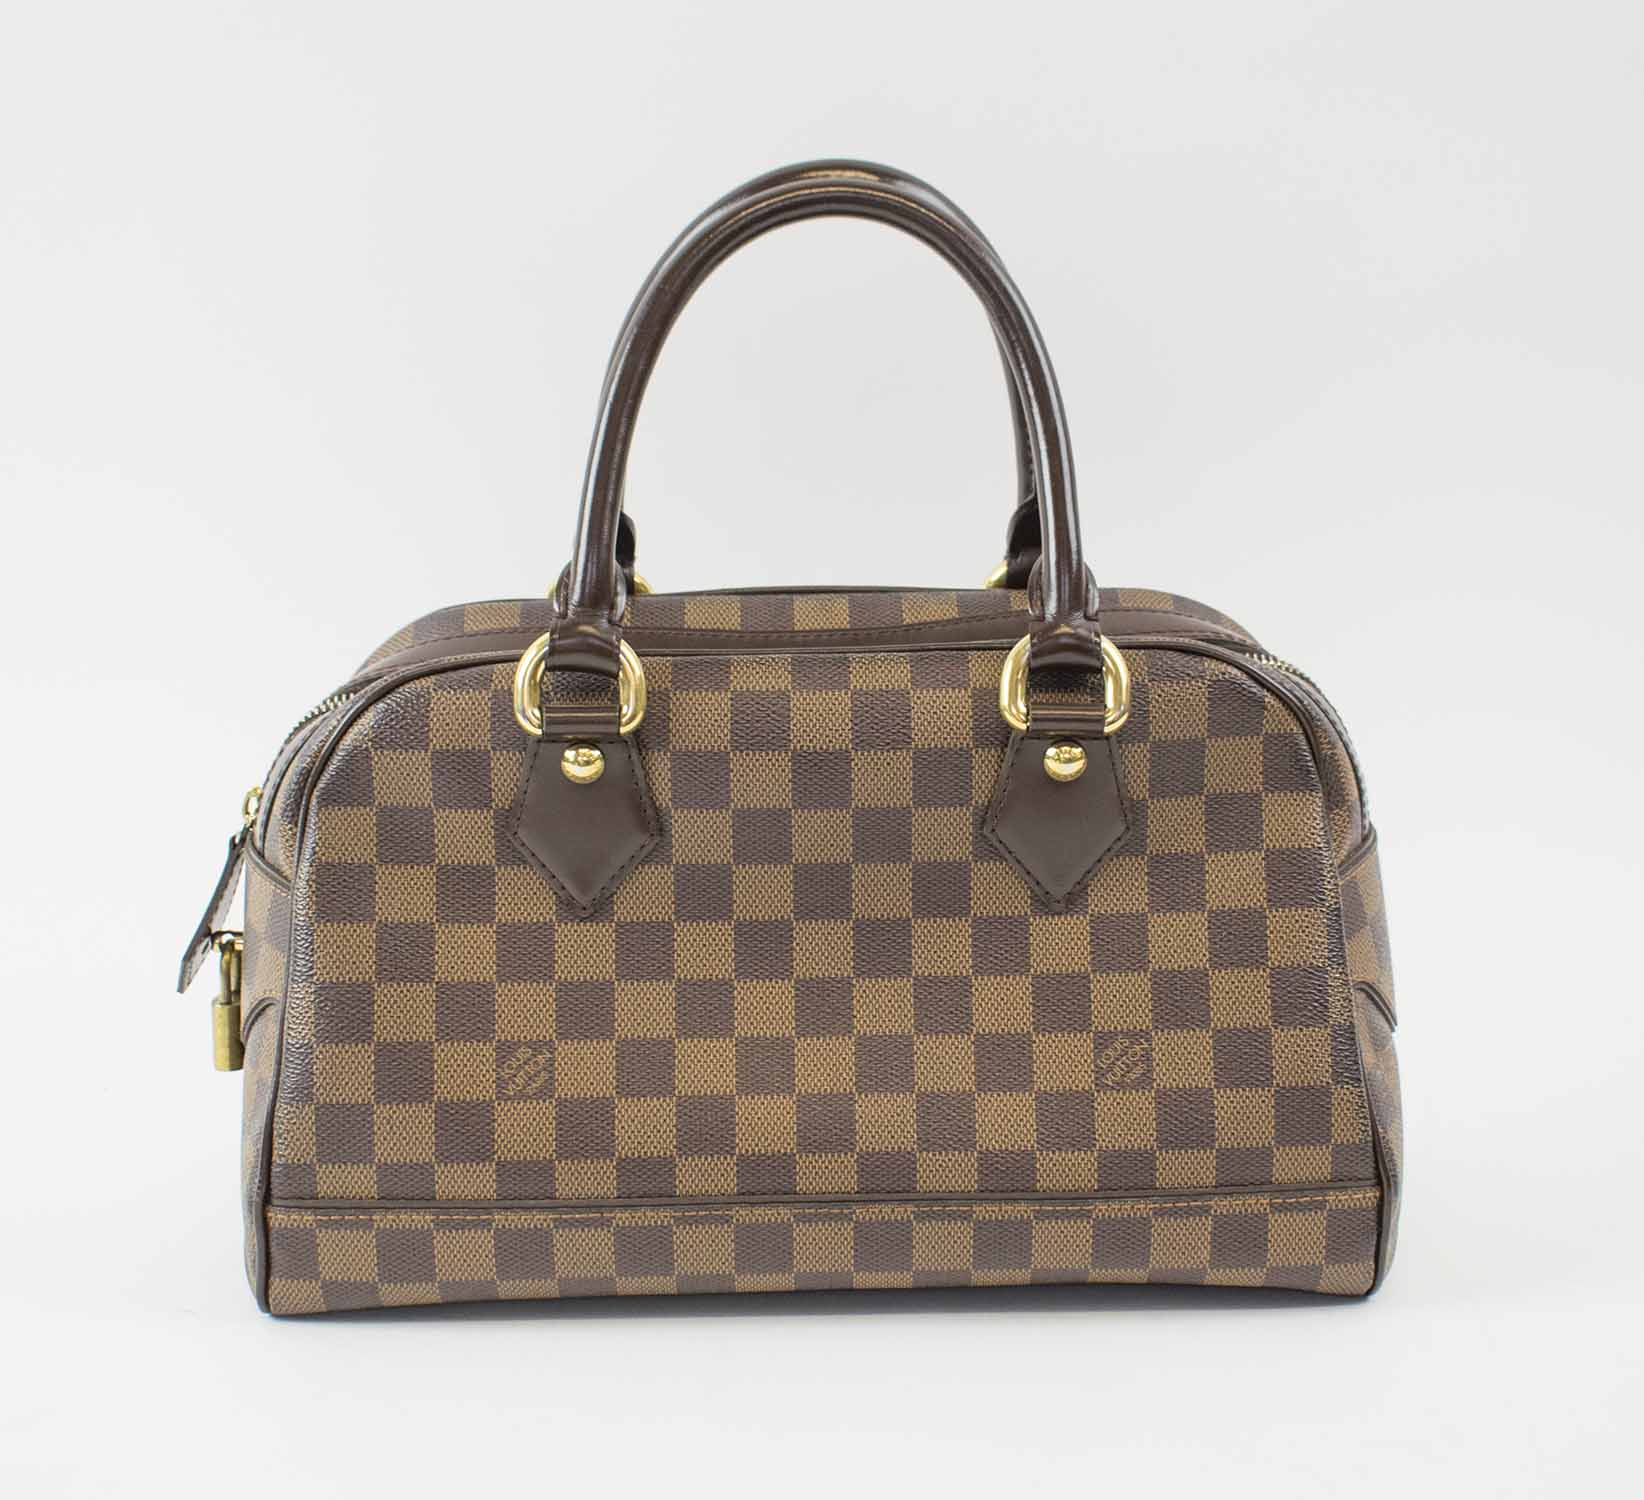 LOUIS VUITTON DAMIER EBENE SPEEDY 30 BOSTON BAG MM for sale at auction on  29th October